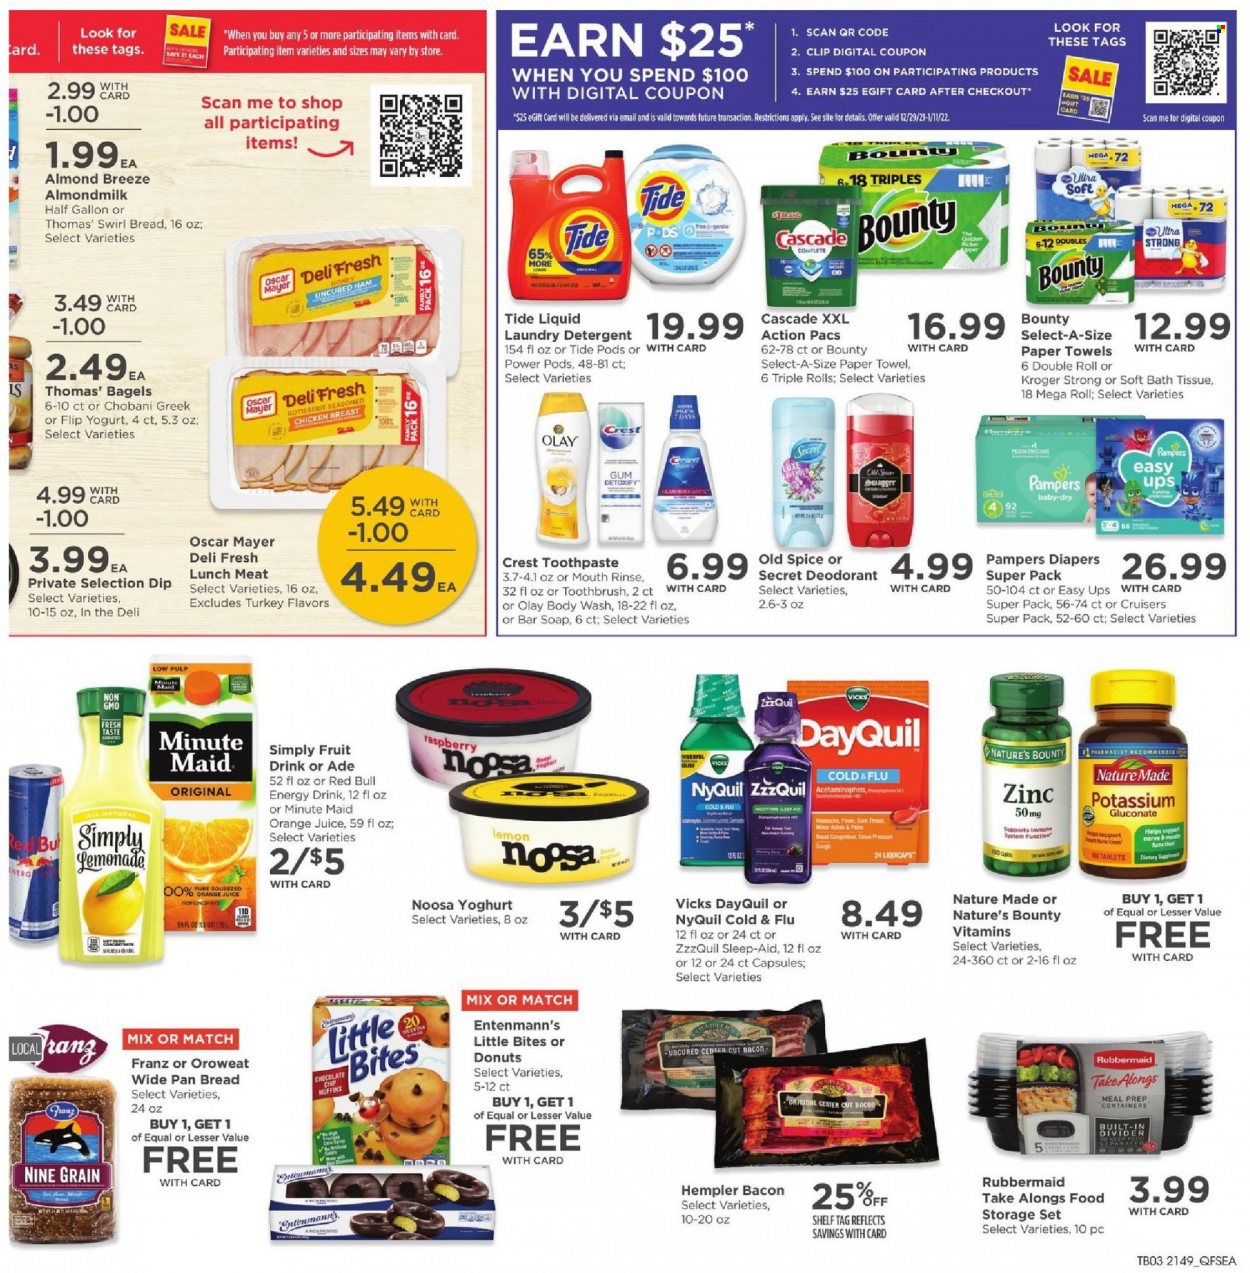 thumbnail - QFC Flyer - 01/05/2022 - 01/11/2022 - Sales products - bagels, donut, muffin, Entenmann's, bacon, Oscar Mayer, lunch meat, yoghurt, Chobani, almond milk, Almond Breeze, dip, chocolate chips, Little Bites, spice, honey, orange juice, juice, energy drink, fruit drink, Red Bull, fruit punch, Pampers, nappies, bath tissue, kitchen towels, paper towels, detergent, Cascade, Tide, laundry detergent, body wash, Old Spice, soap bar, soap, toothbrush, toothpaste, Crest, Olay, anti-perspirant, deodorant, Vicks, pan, storage container set. Page 5.